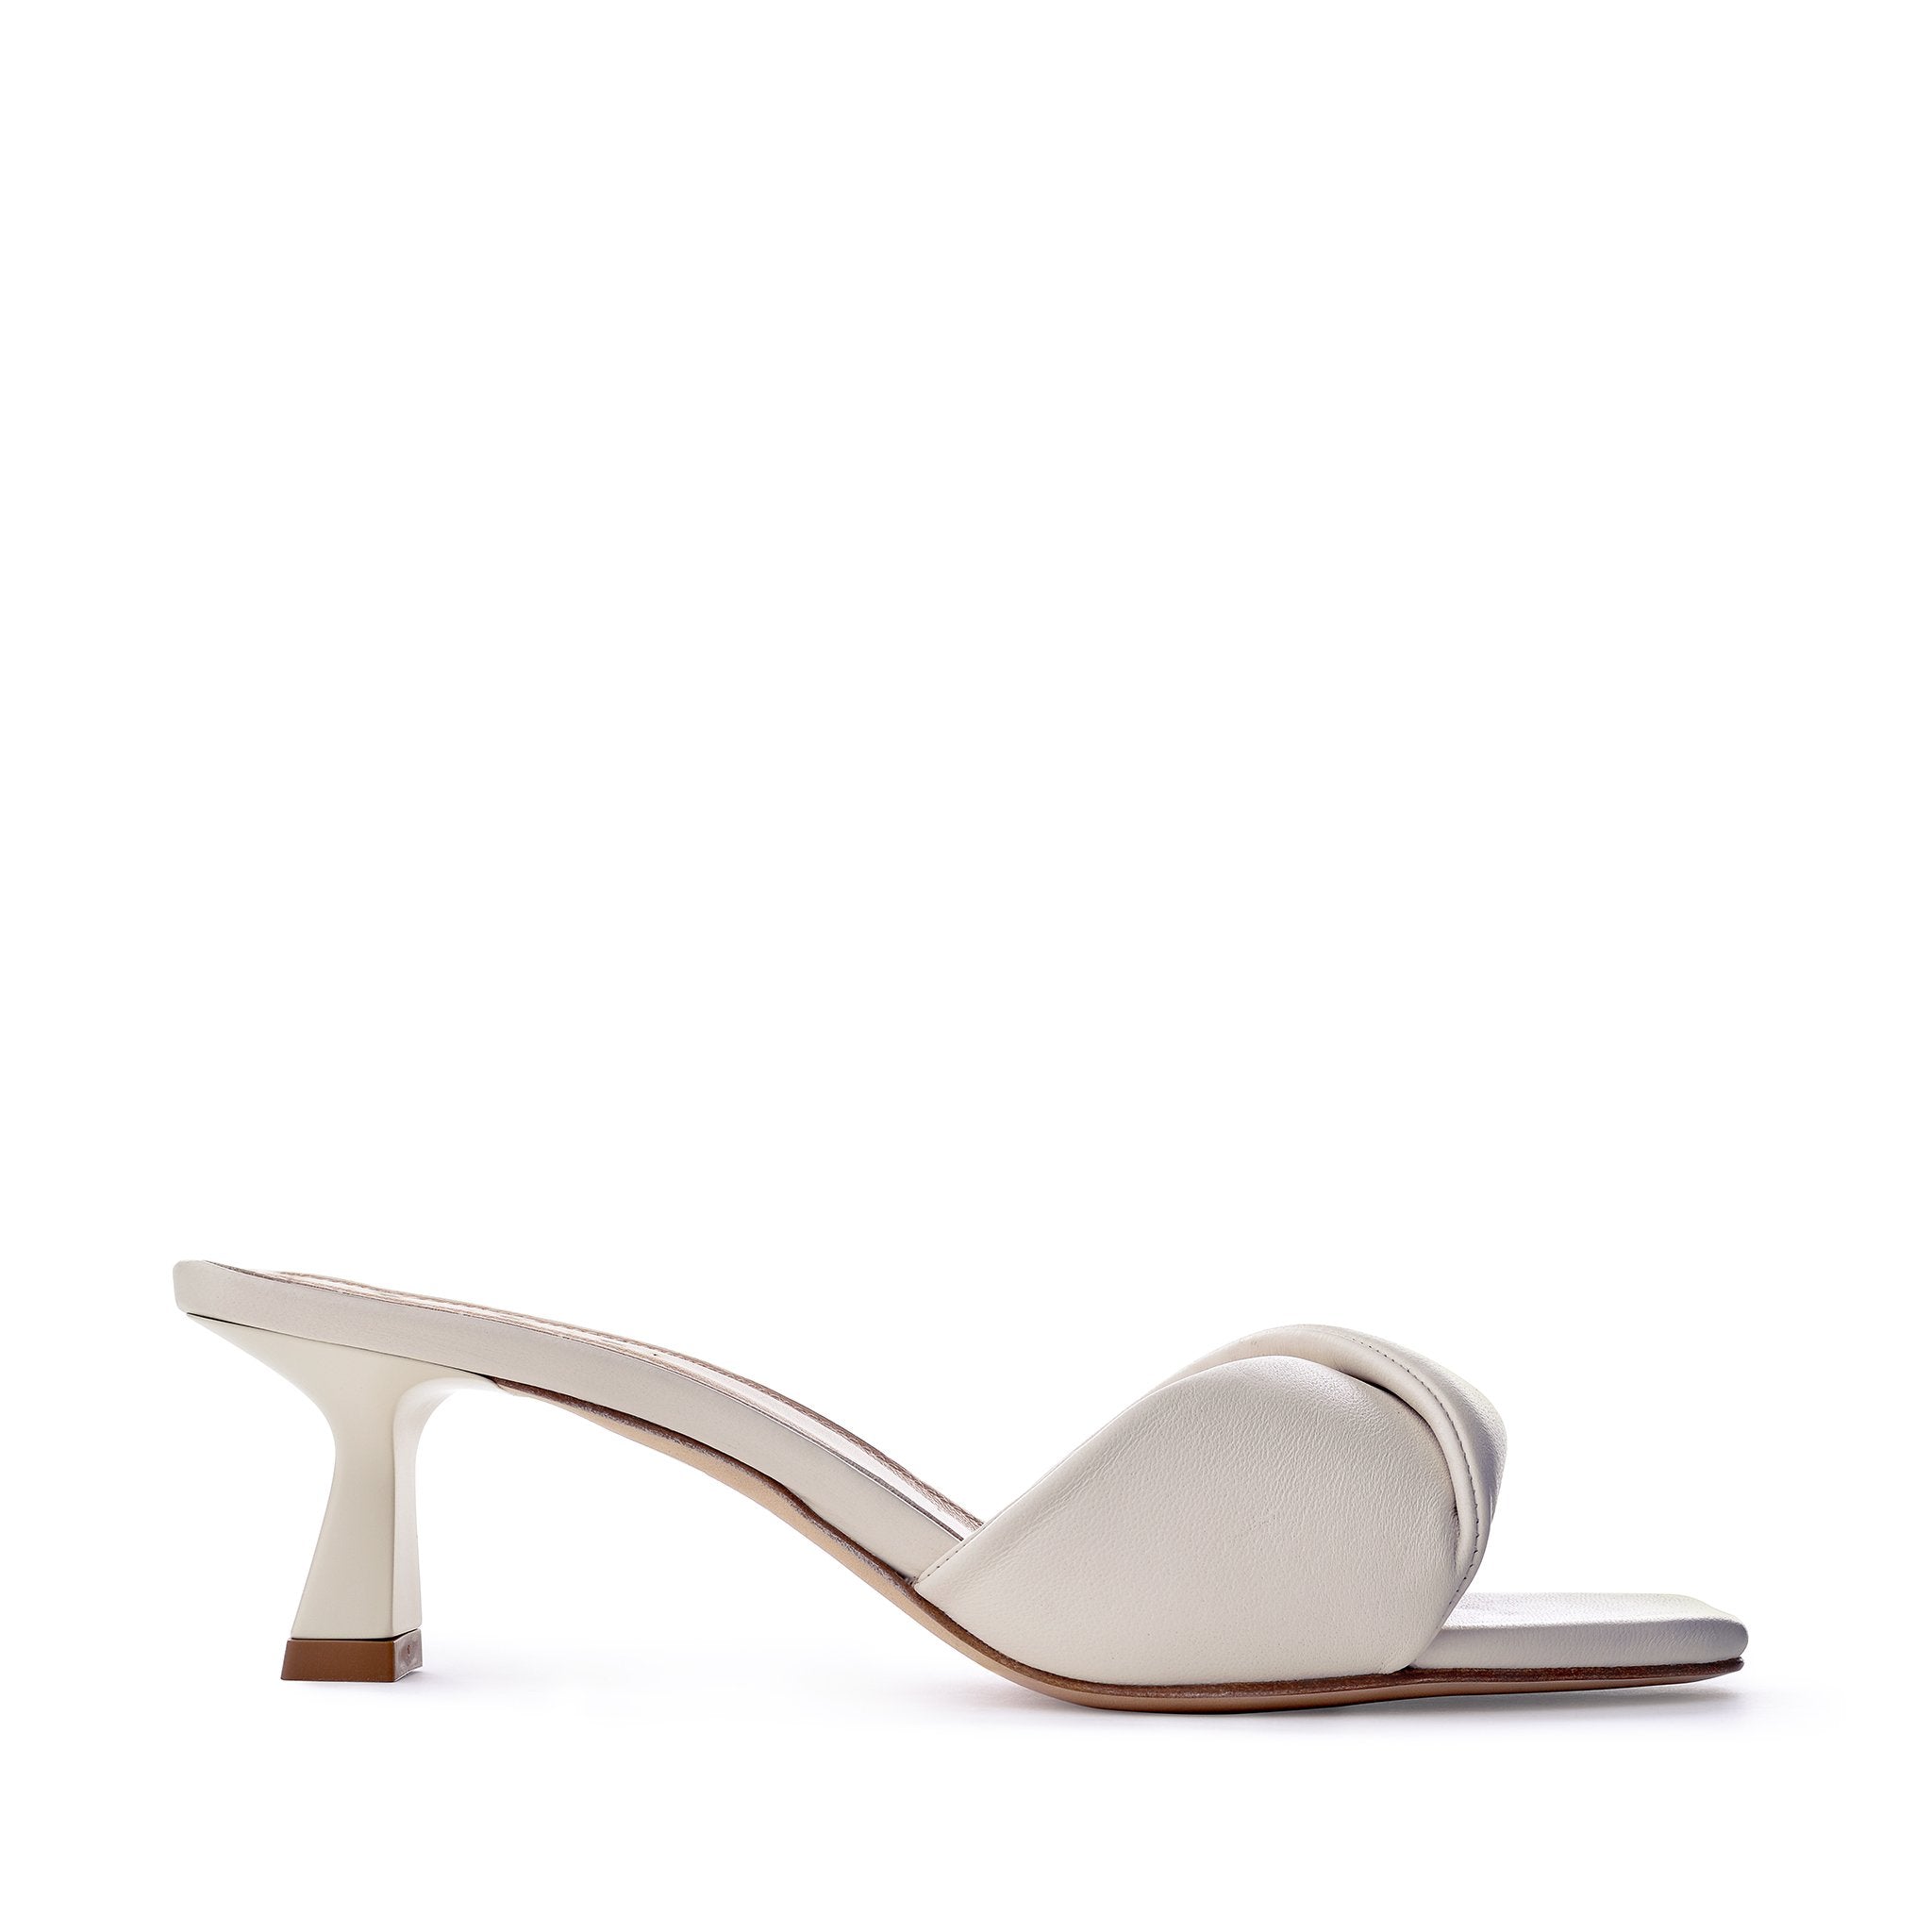 Haya Off White Soft Leather Sandals 1413-01 - 1